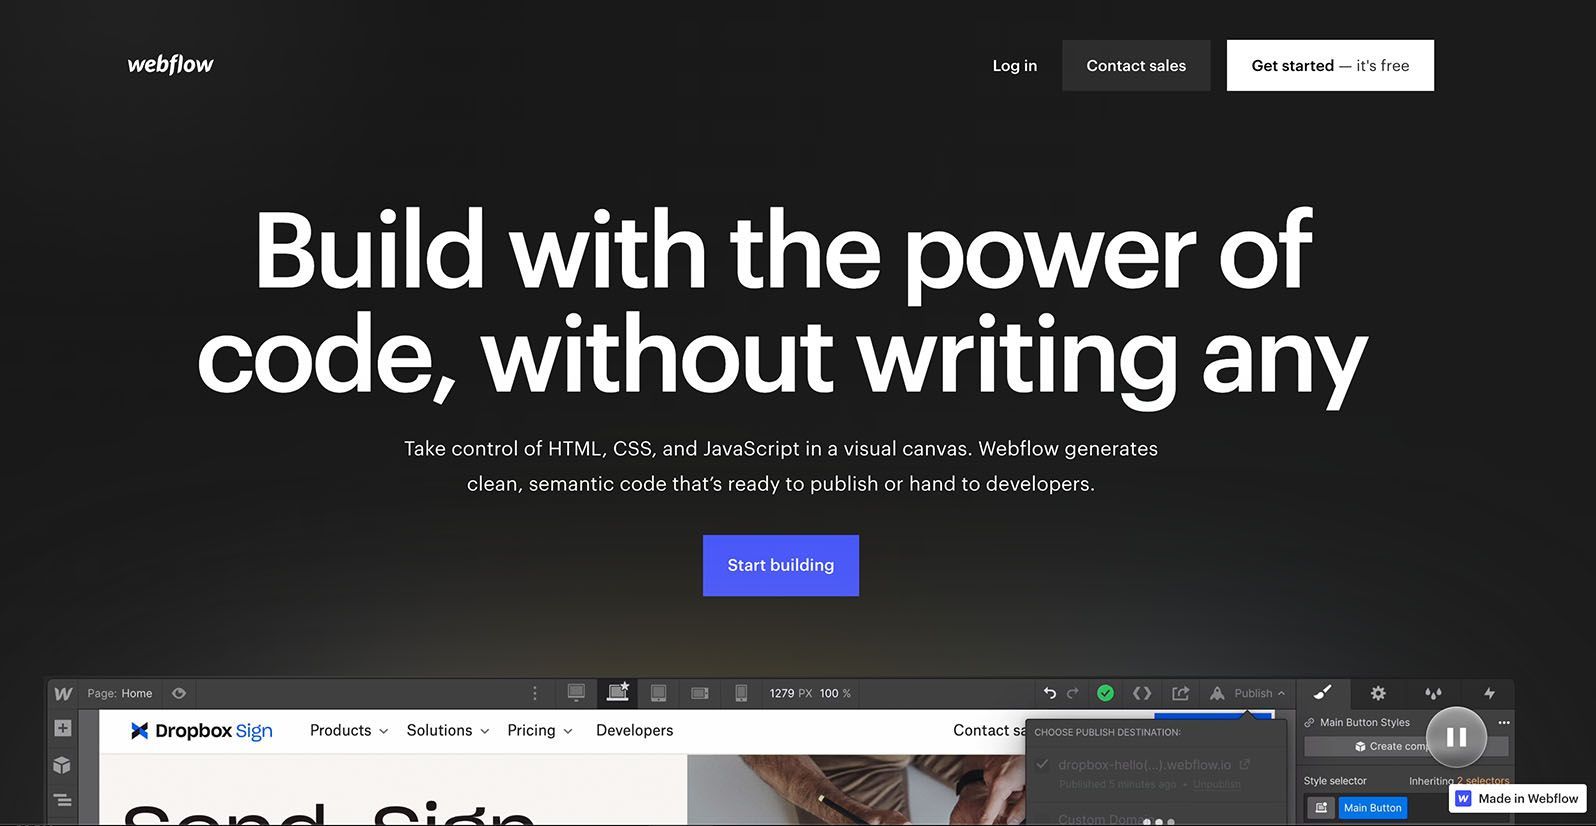 Webflow: Build with the power of code, without having to write any.